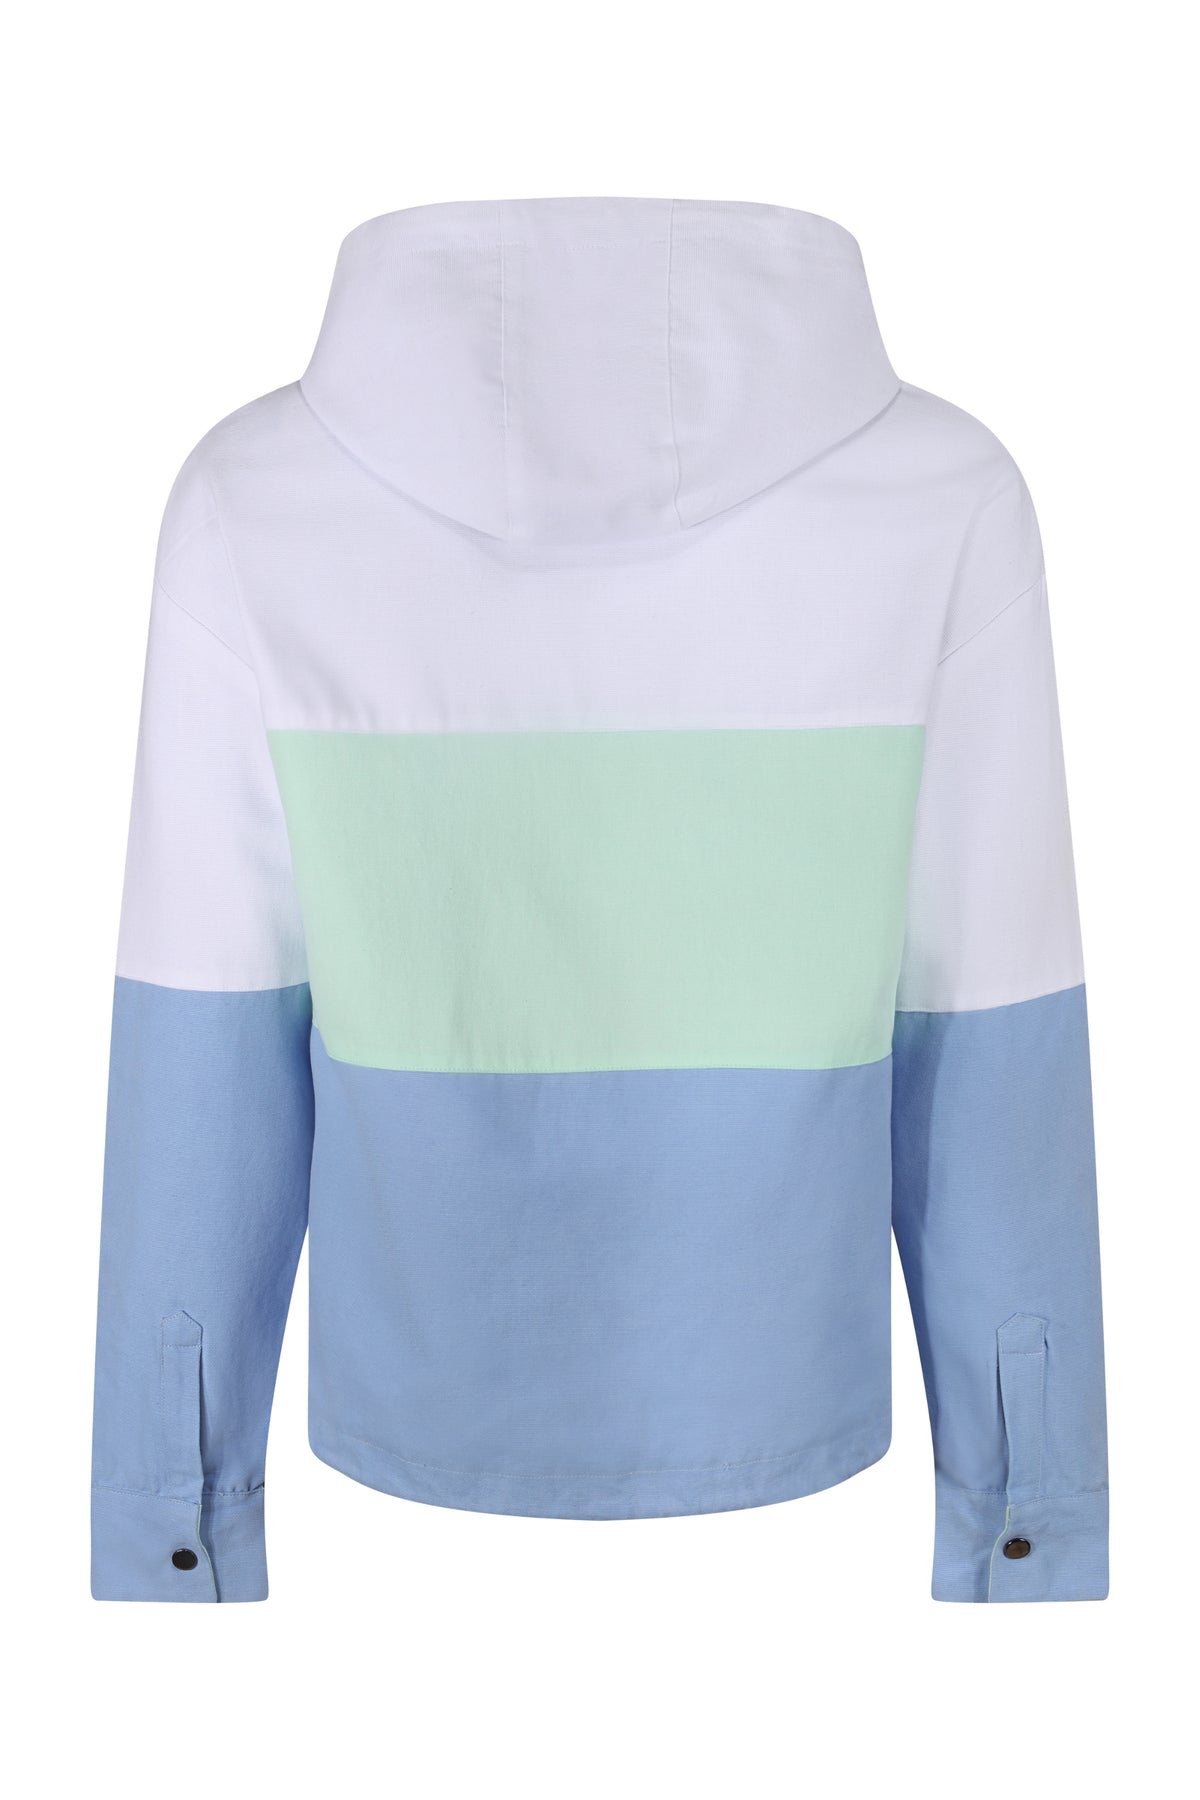 Cornwall Unisex Windbreaker - White - Whale Of A Time Clothing